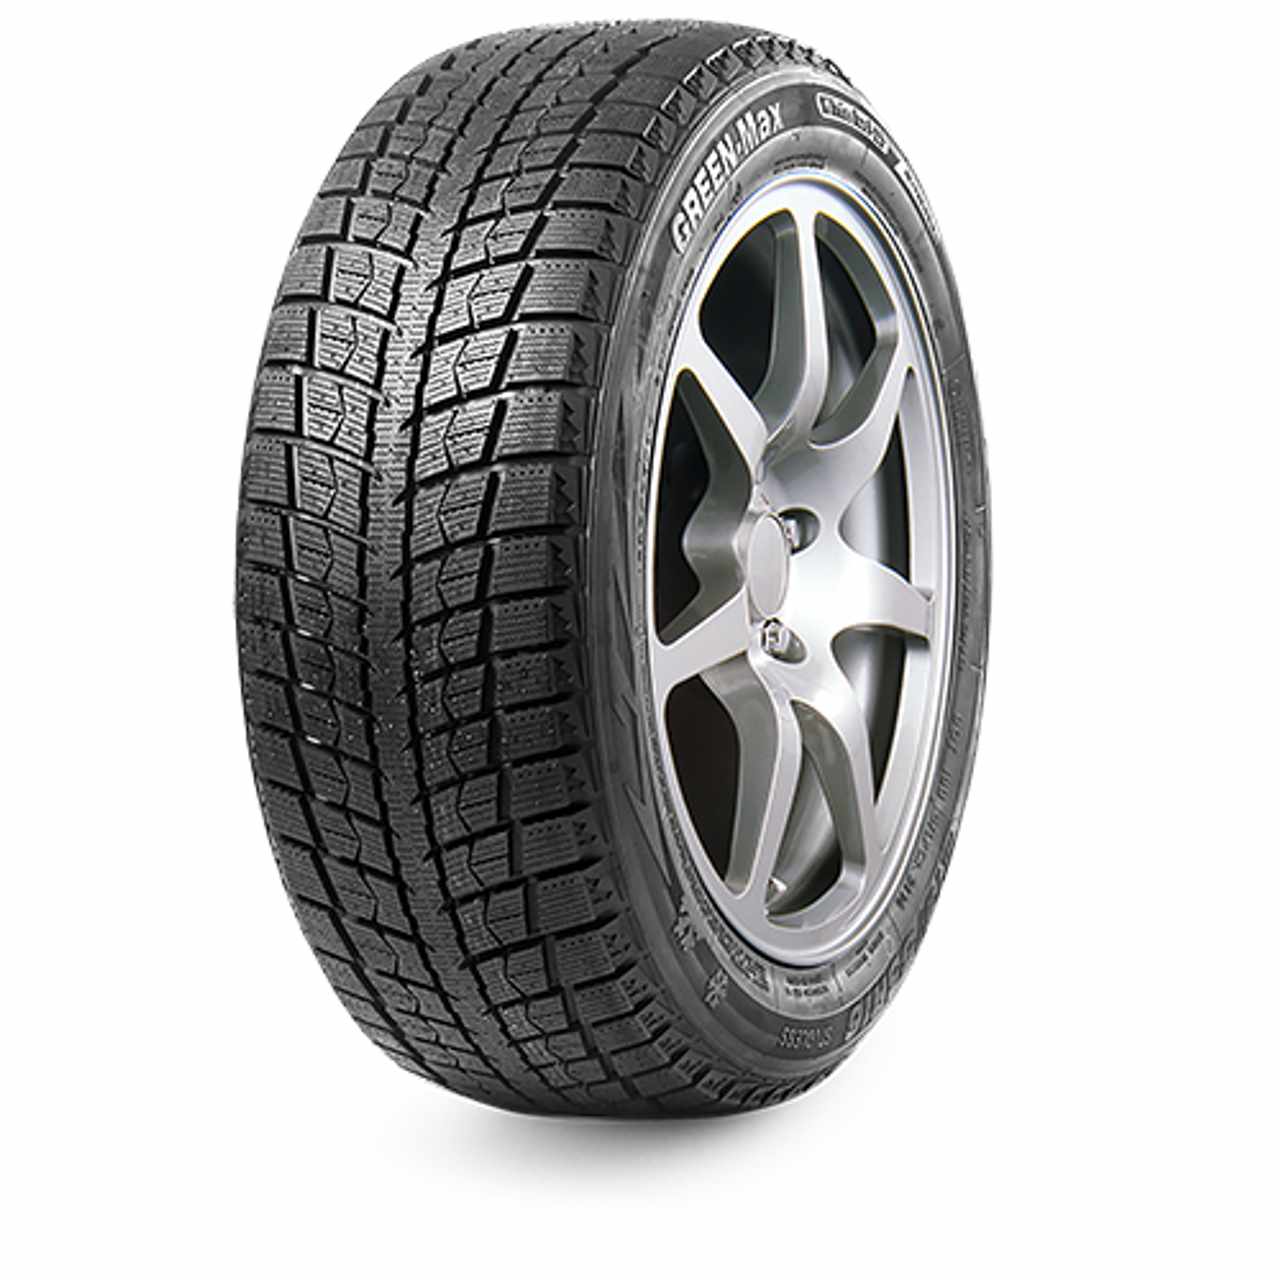 LINGLONG GREEN-MAX WINTER ICE I-15 SUV 285/35R20 100T NORDIC COMPOUND MFS BSW von LINGLONG